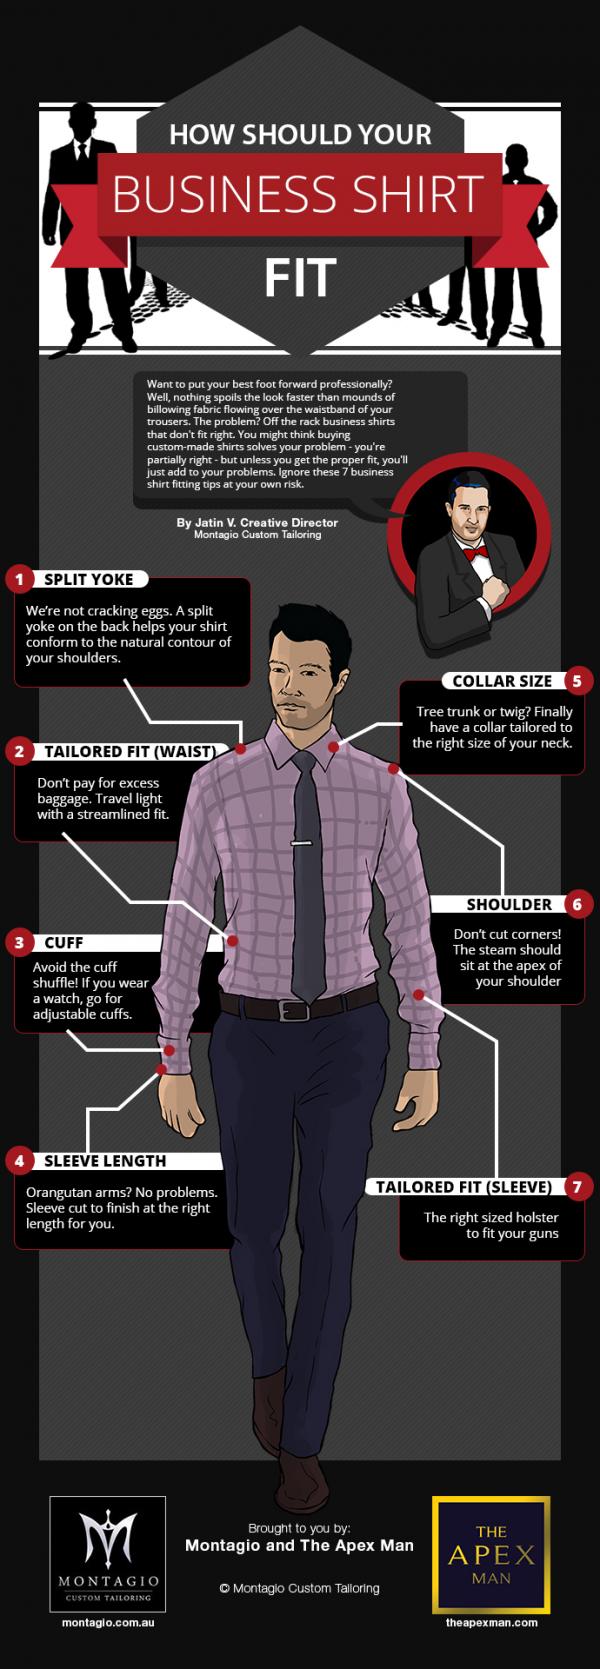 How Should Your Business Shirt Fit (Infographic)